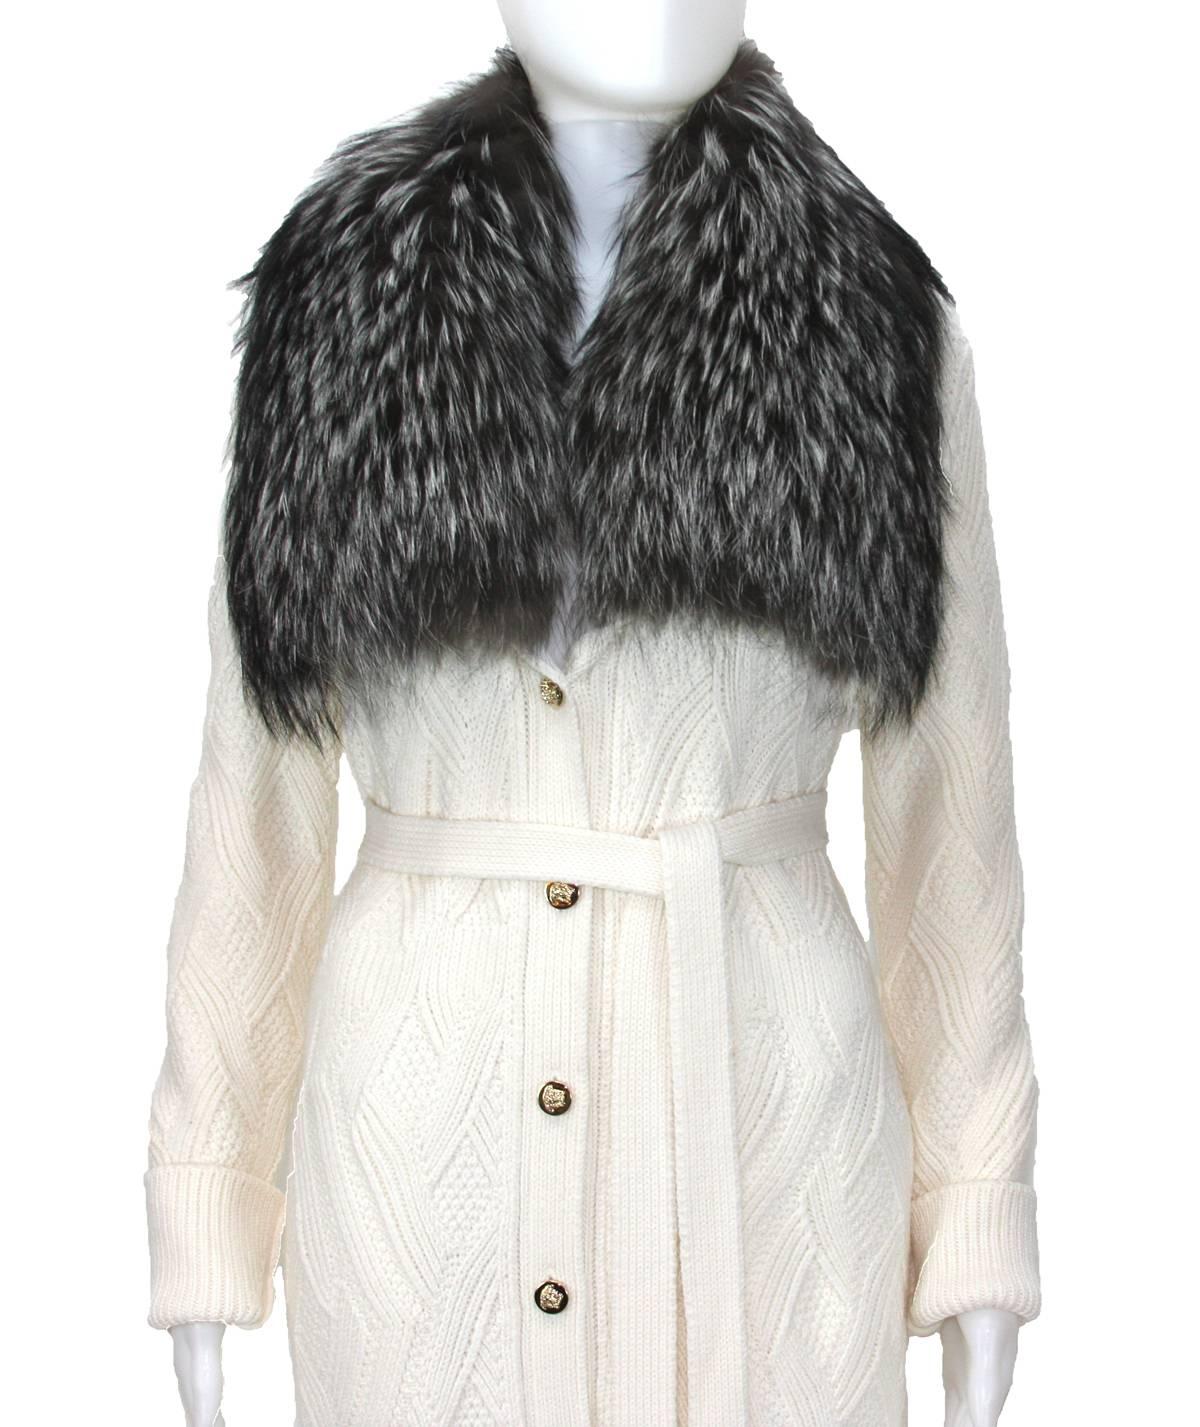 New Versace 100% Wool Silver Fox Collar Cardigan Coat
Designer Size - 38
100% Wool
Color - Cream
Real Silver Fox - Origin Finland
Removable Oversize Fox Fur Collar
Gold-Tone Metal Medusa Button Closure, Two Side Pockets, Detachable Belt.
Made in